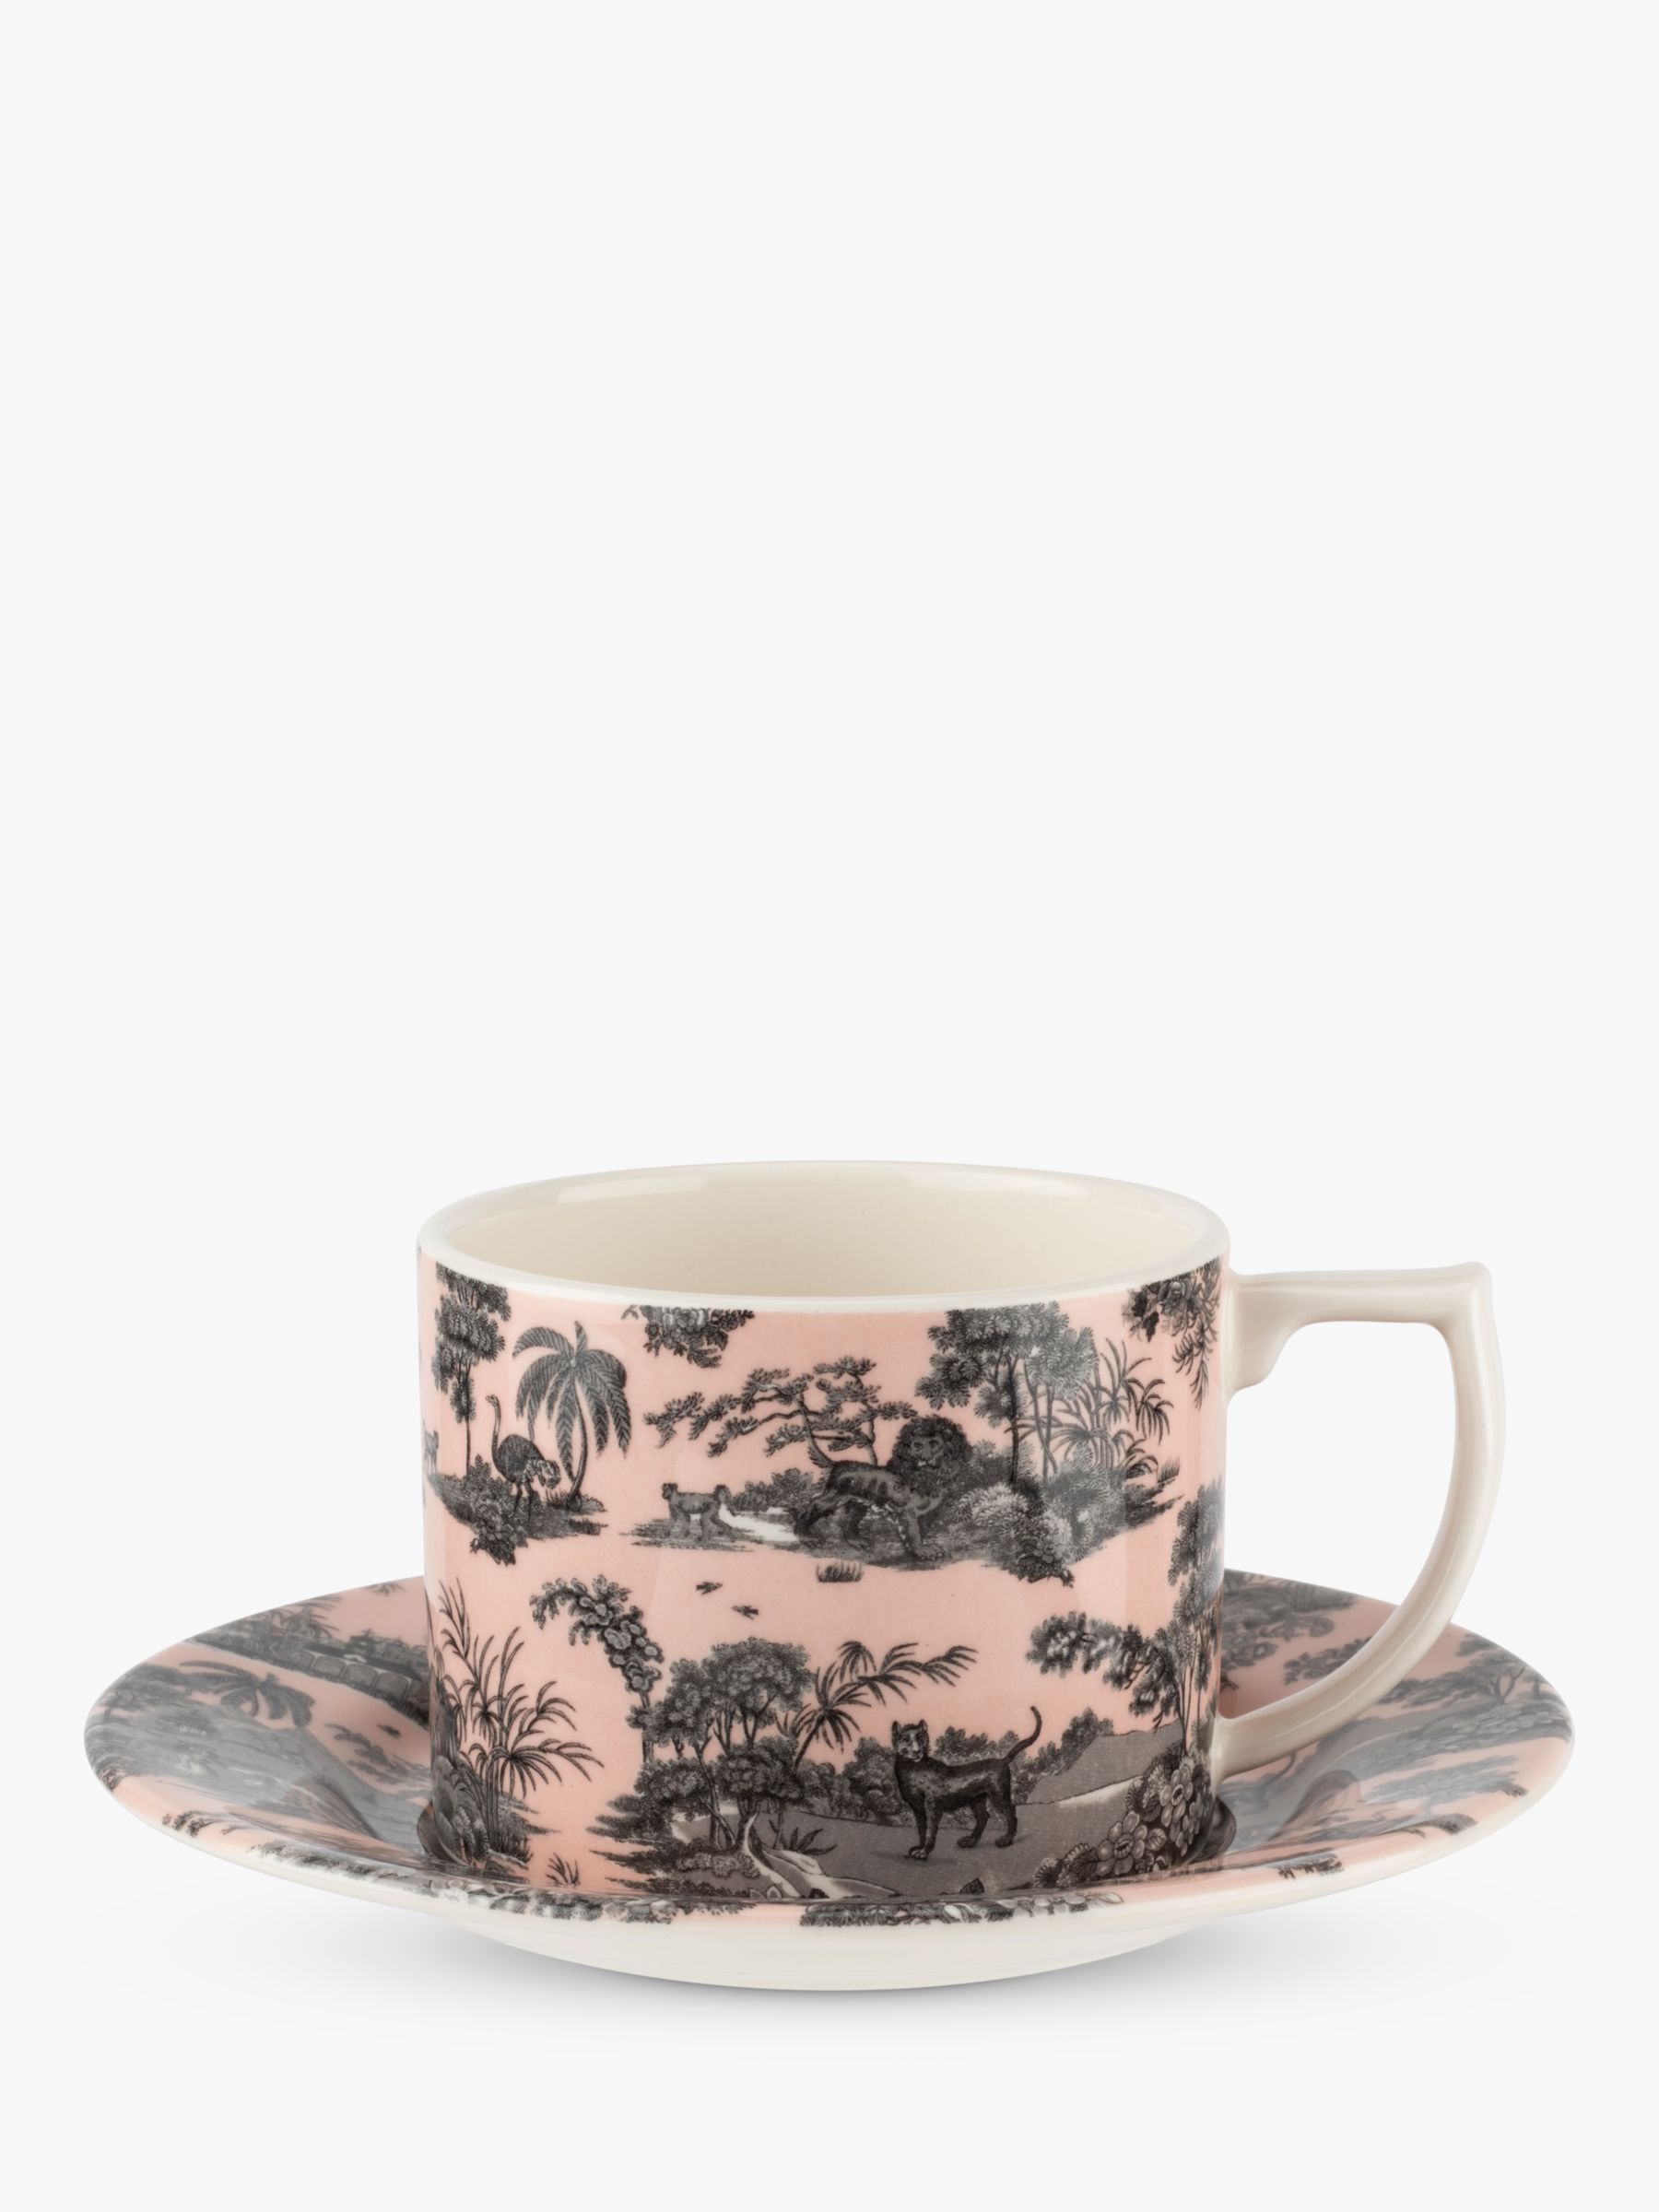 Spode Zoological Gardens Cup & Saucer, 290ml